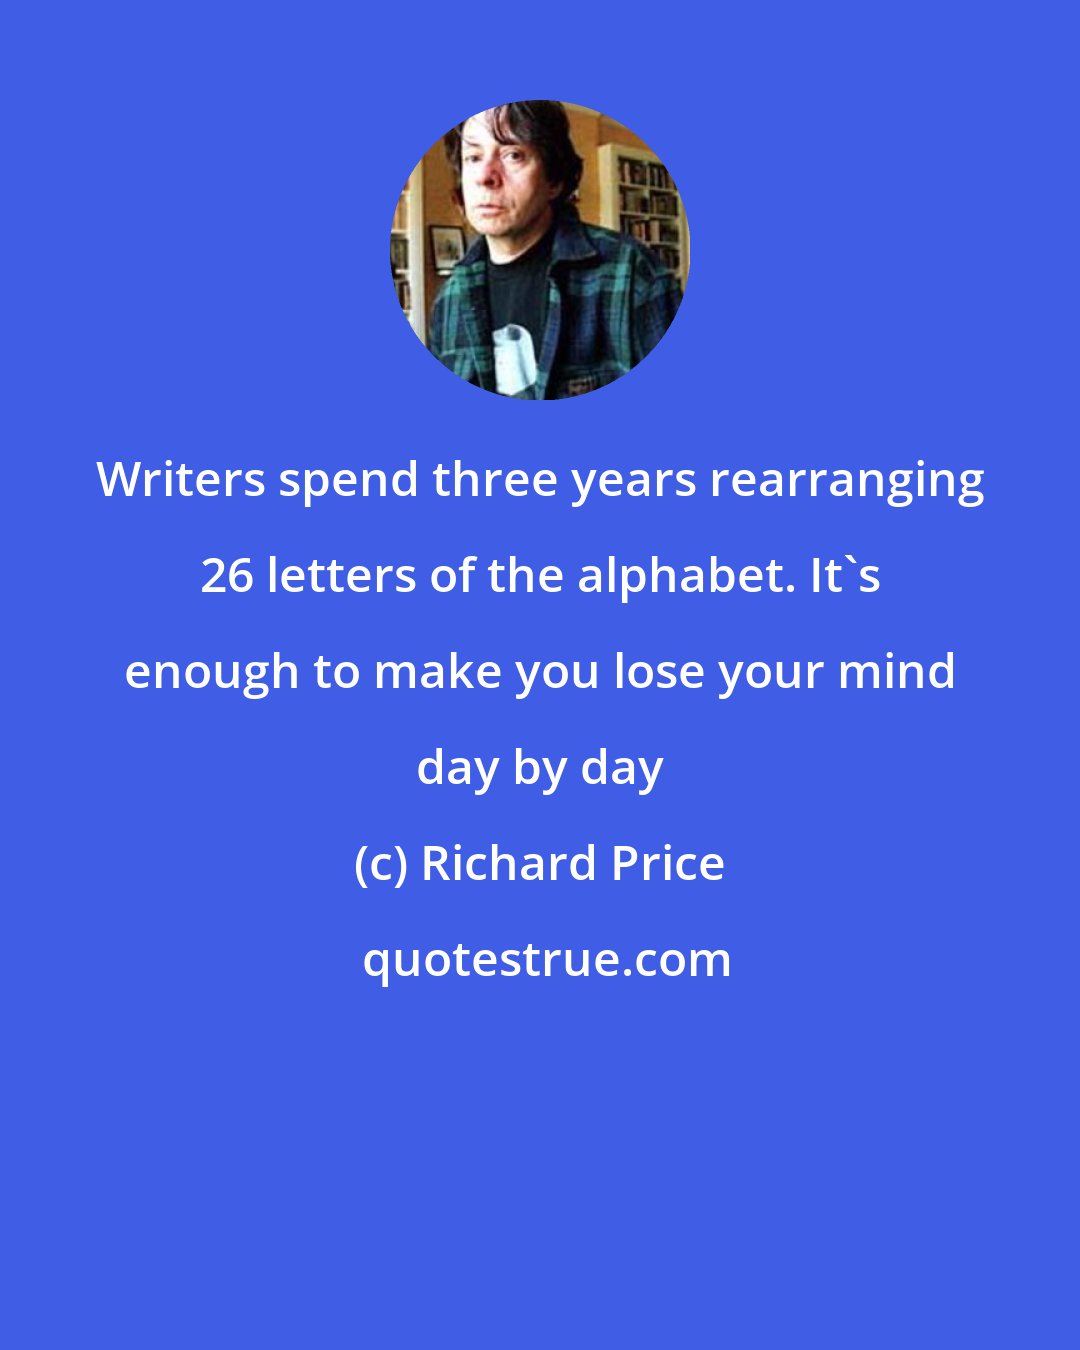 Richard Price: Writers spend three years rearranging 26 letters of the alphabet. It's enough to make you lose your mind day by day